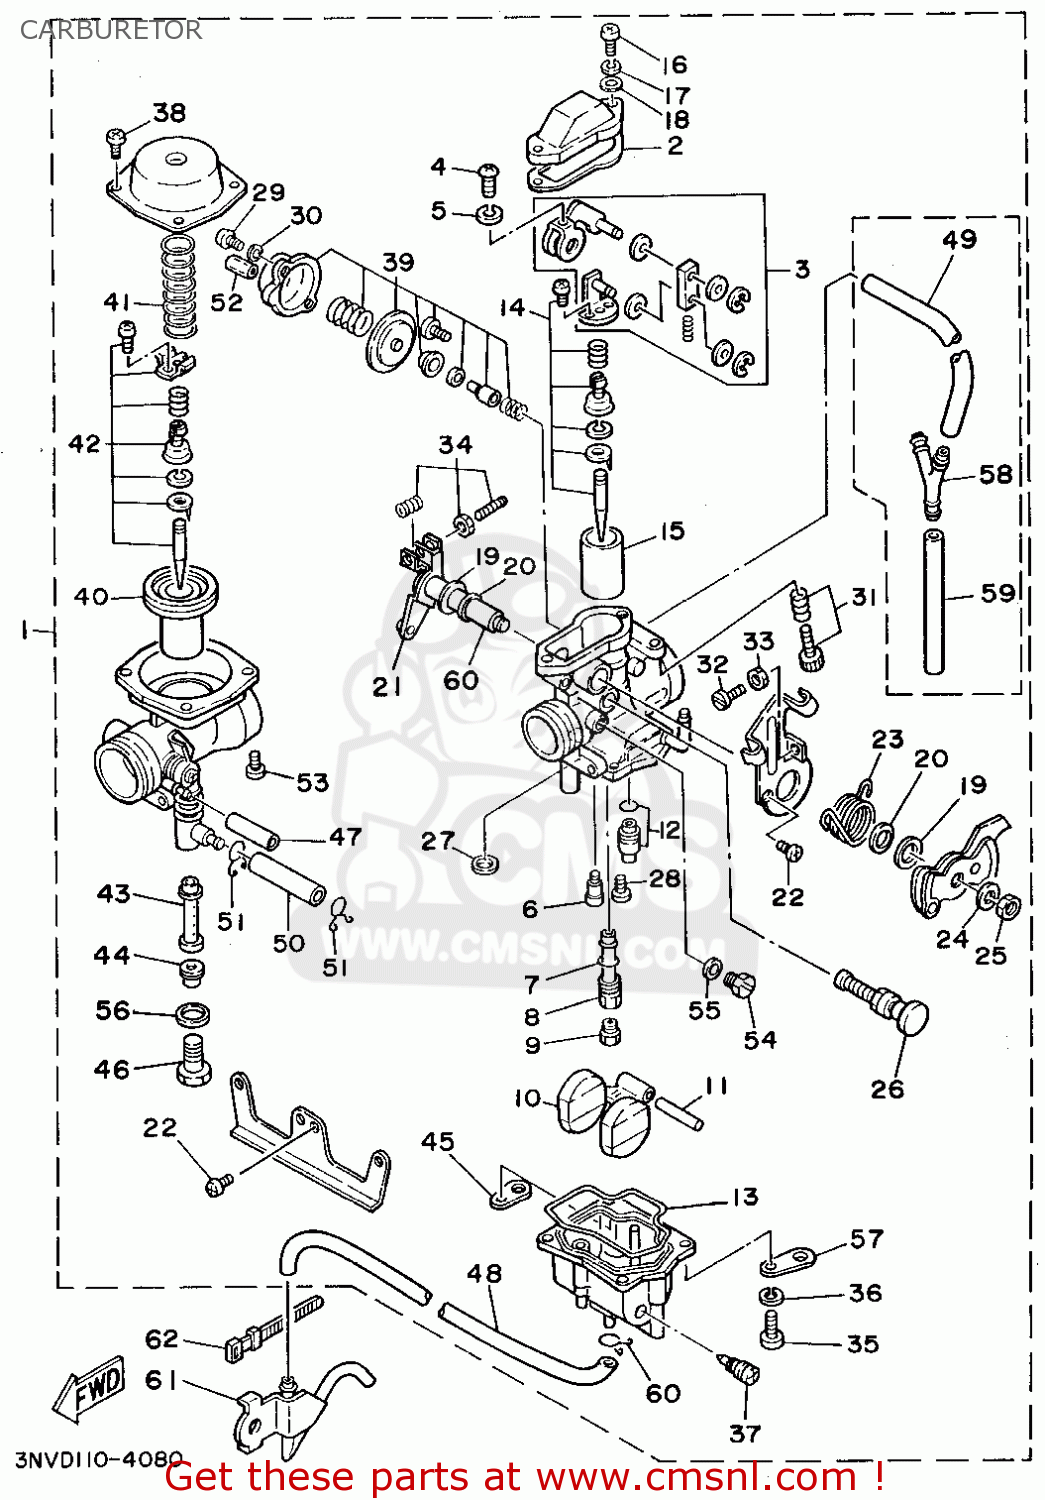 Problems finding manual for 351 Ford Kodiak Page: 1